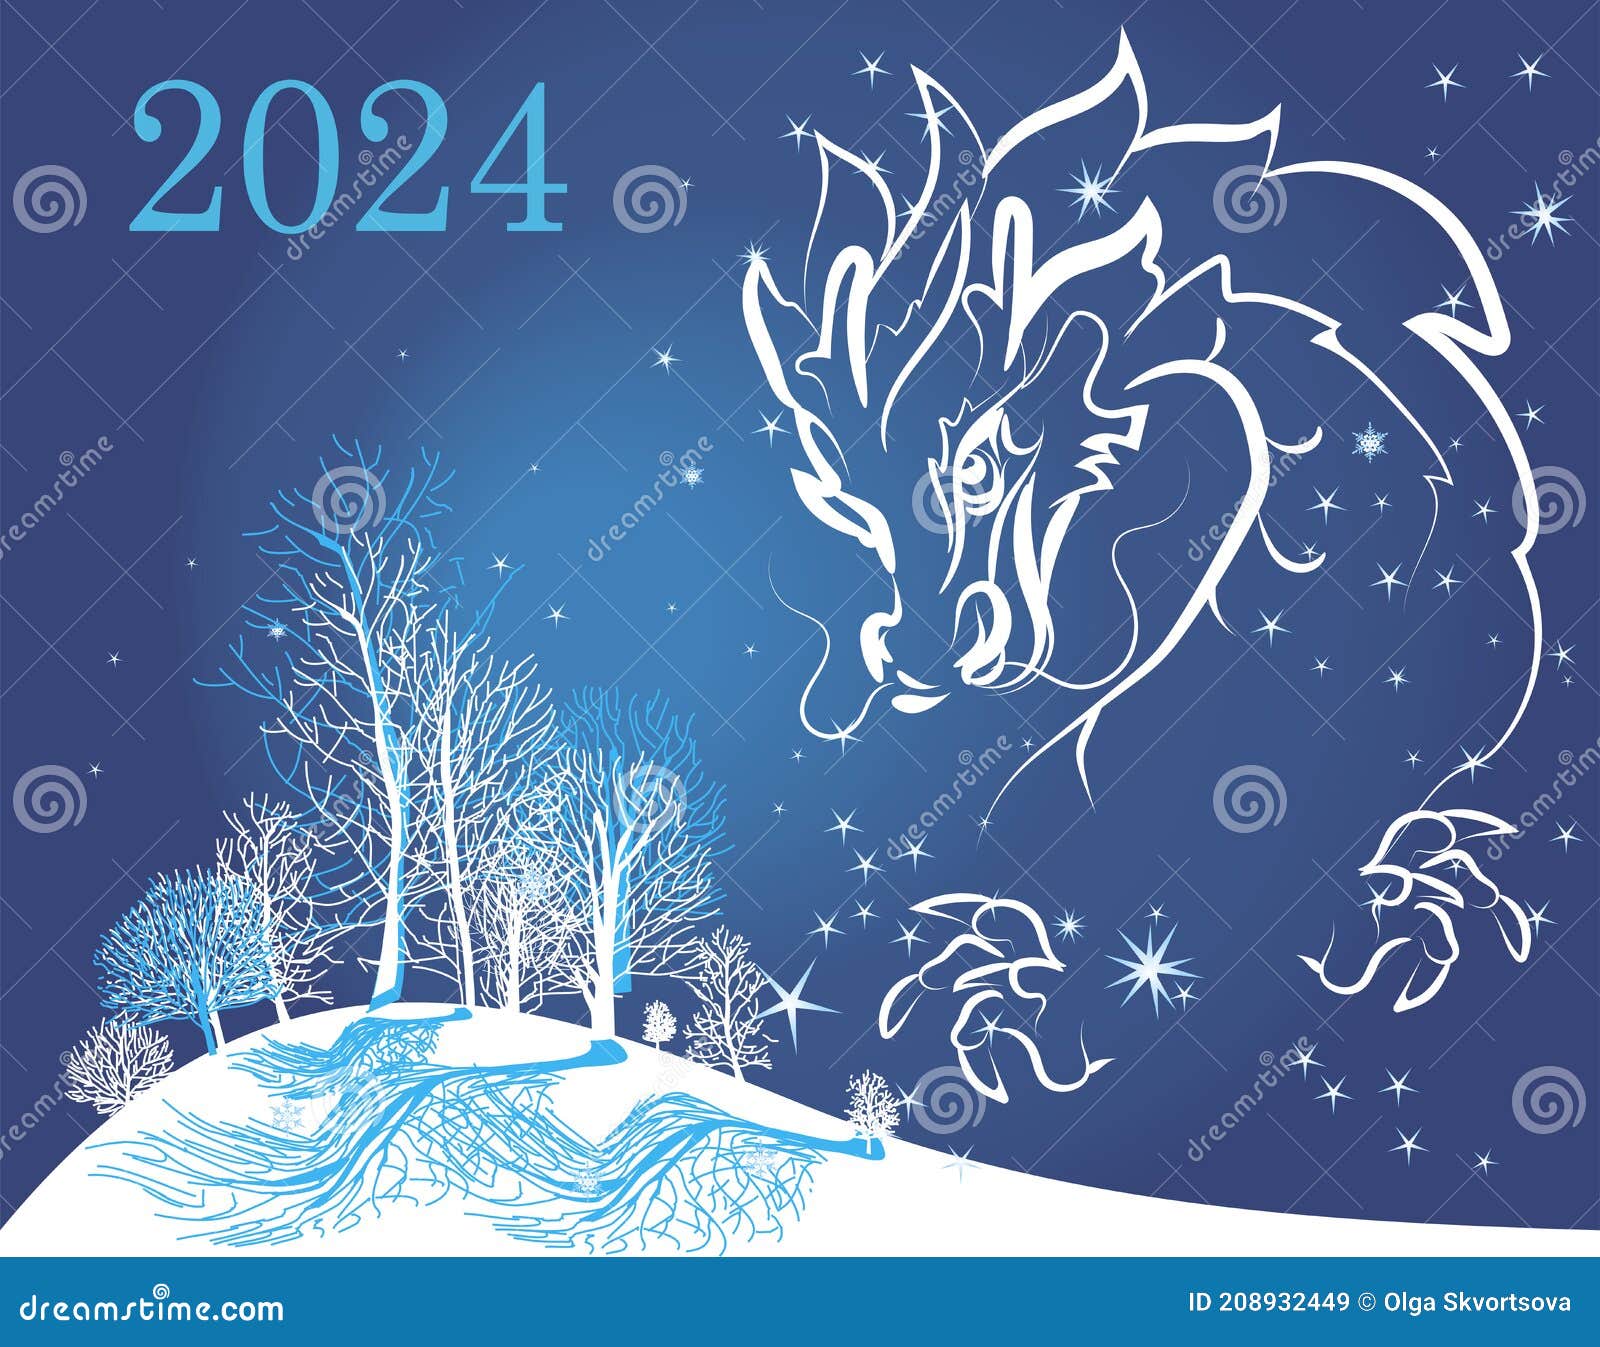 Background Postcard with the Symbol of 2024 on the Eastern Calendar